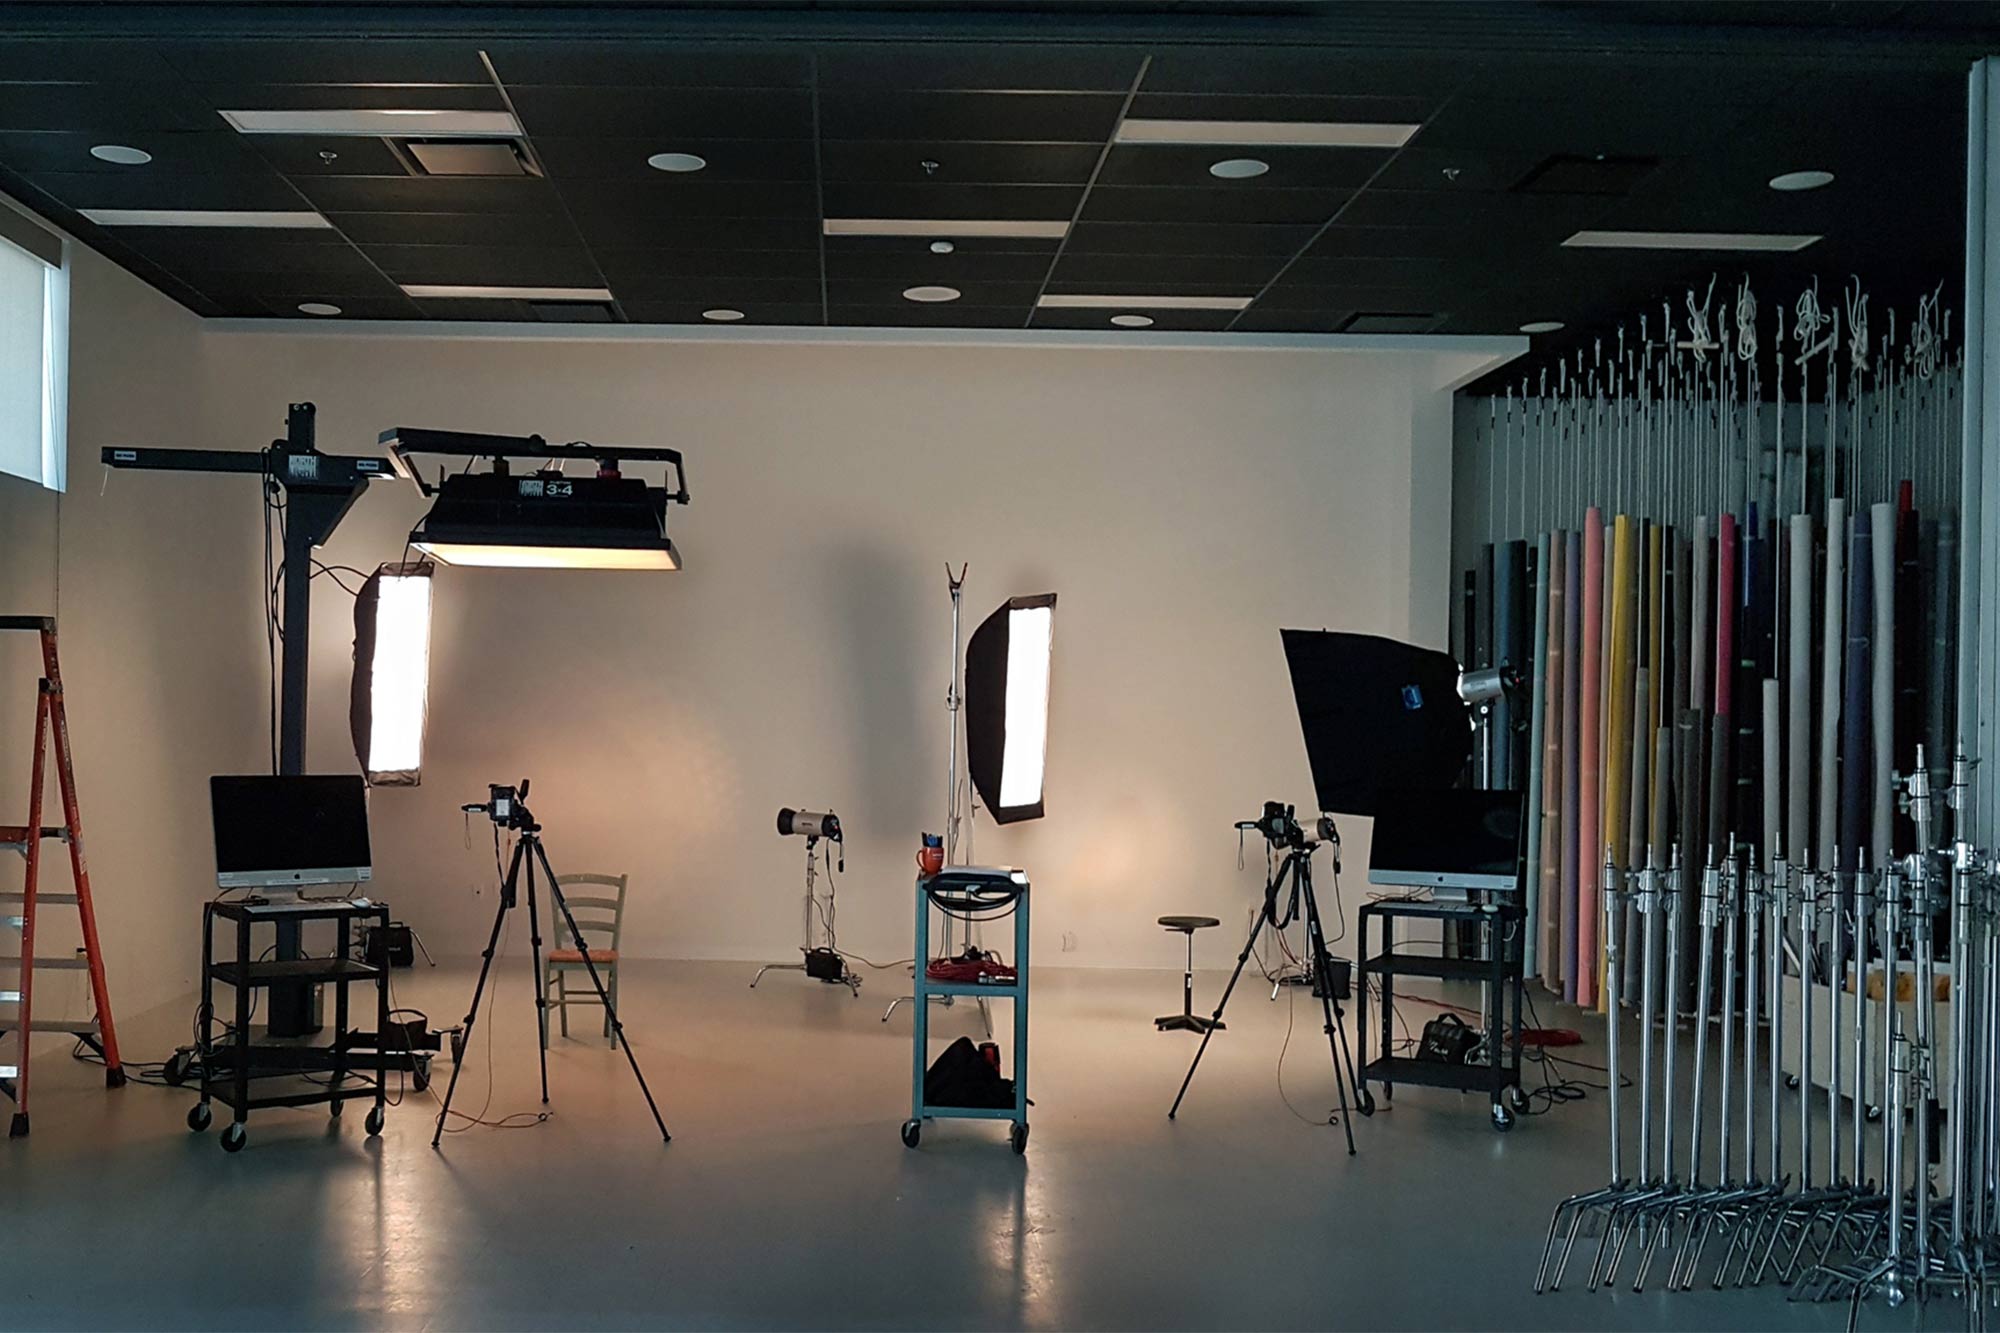 photography studio featuring camera and computer equipment, lighting, tripods, backdrops and more